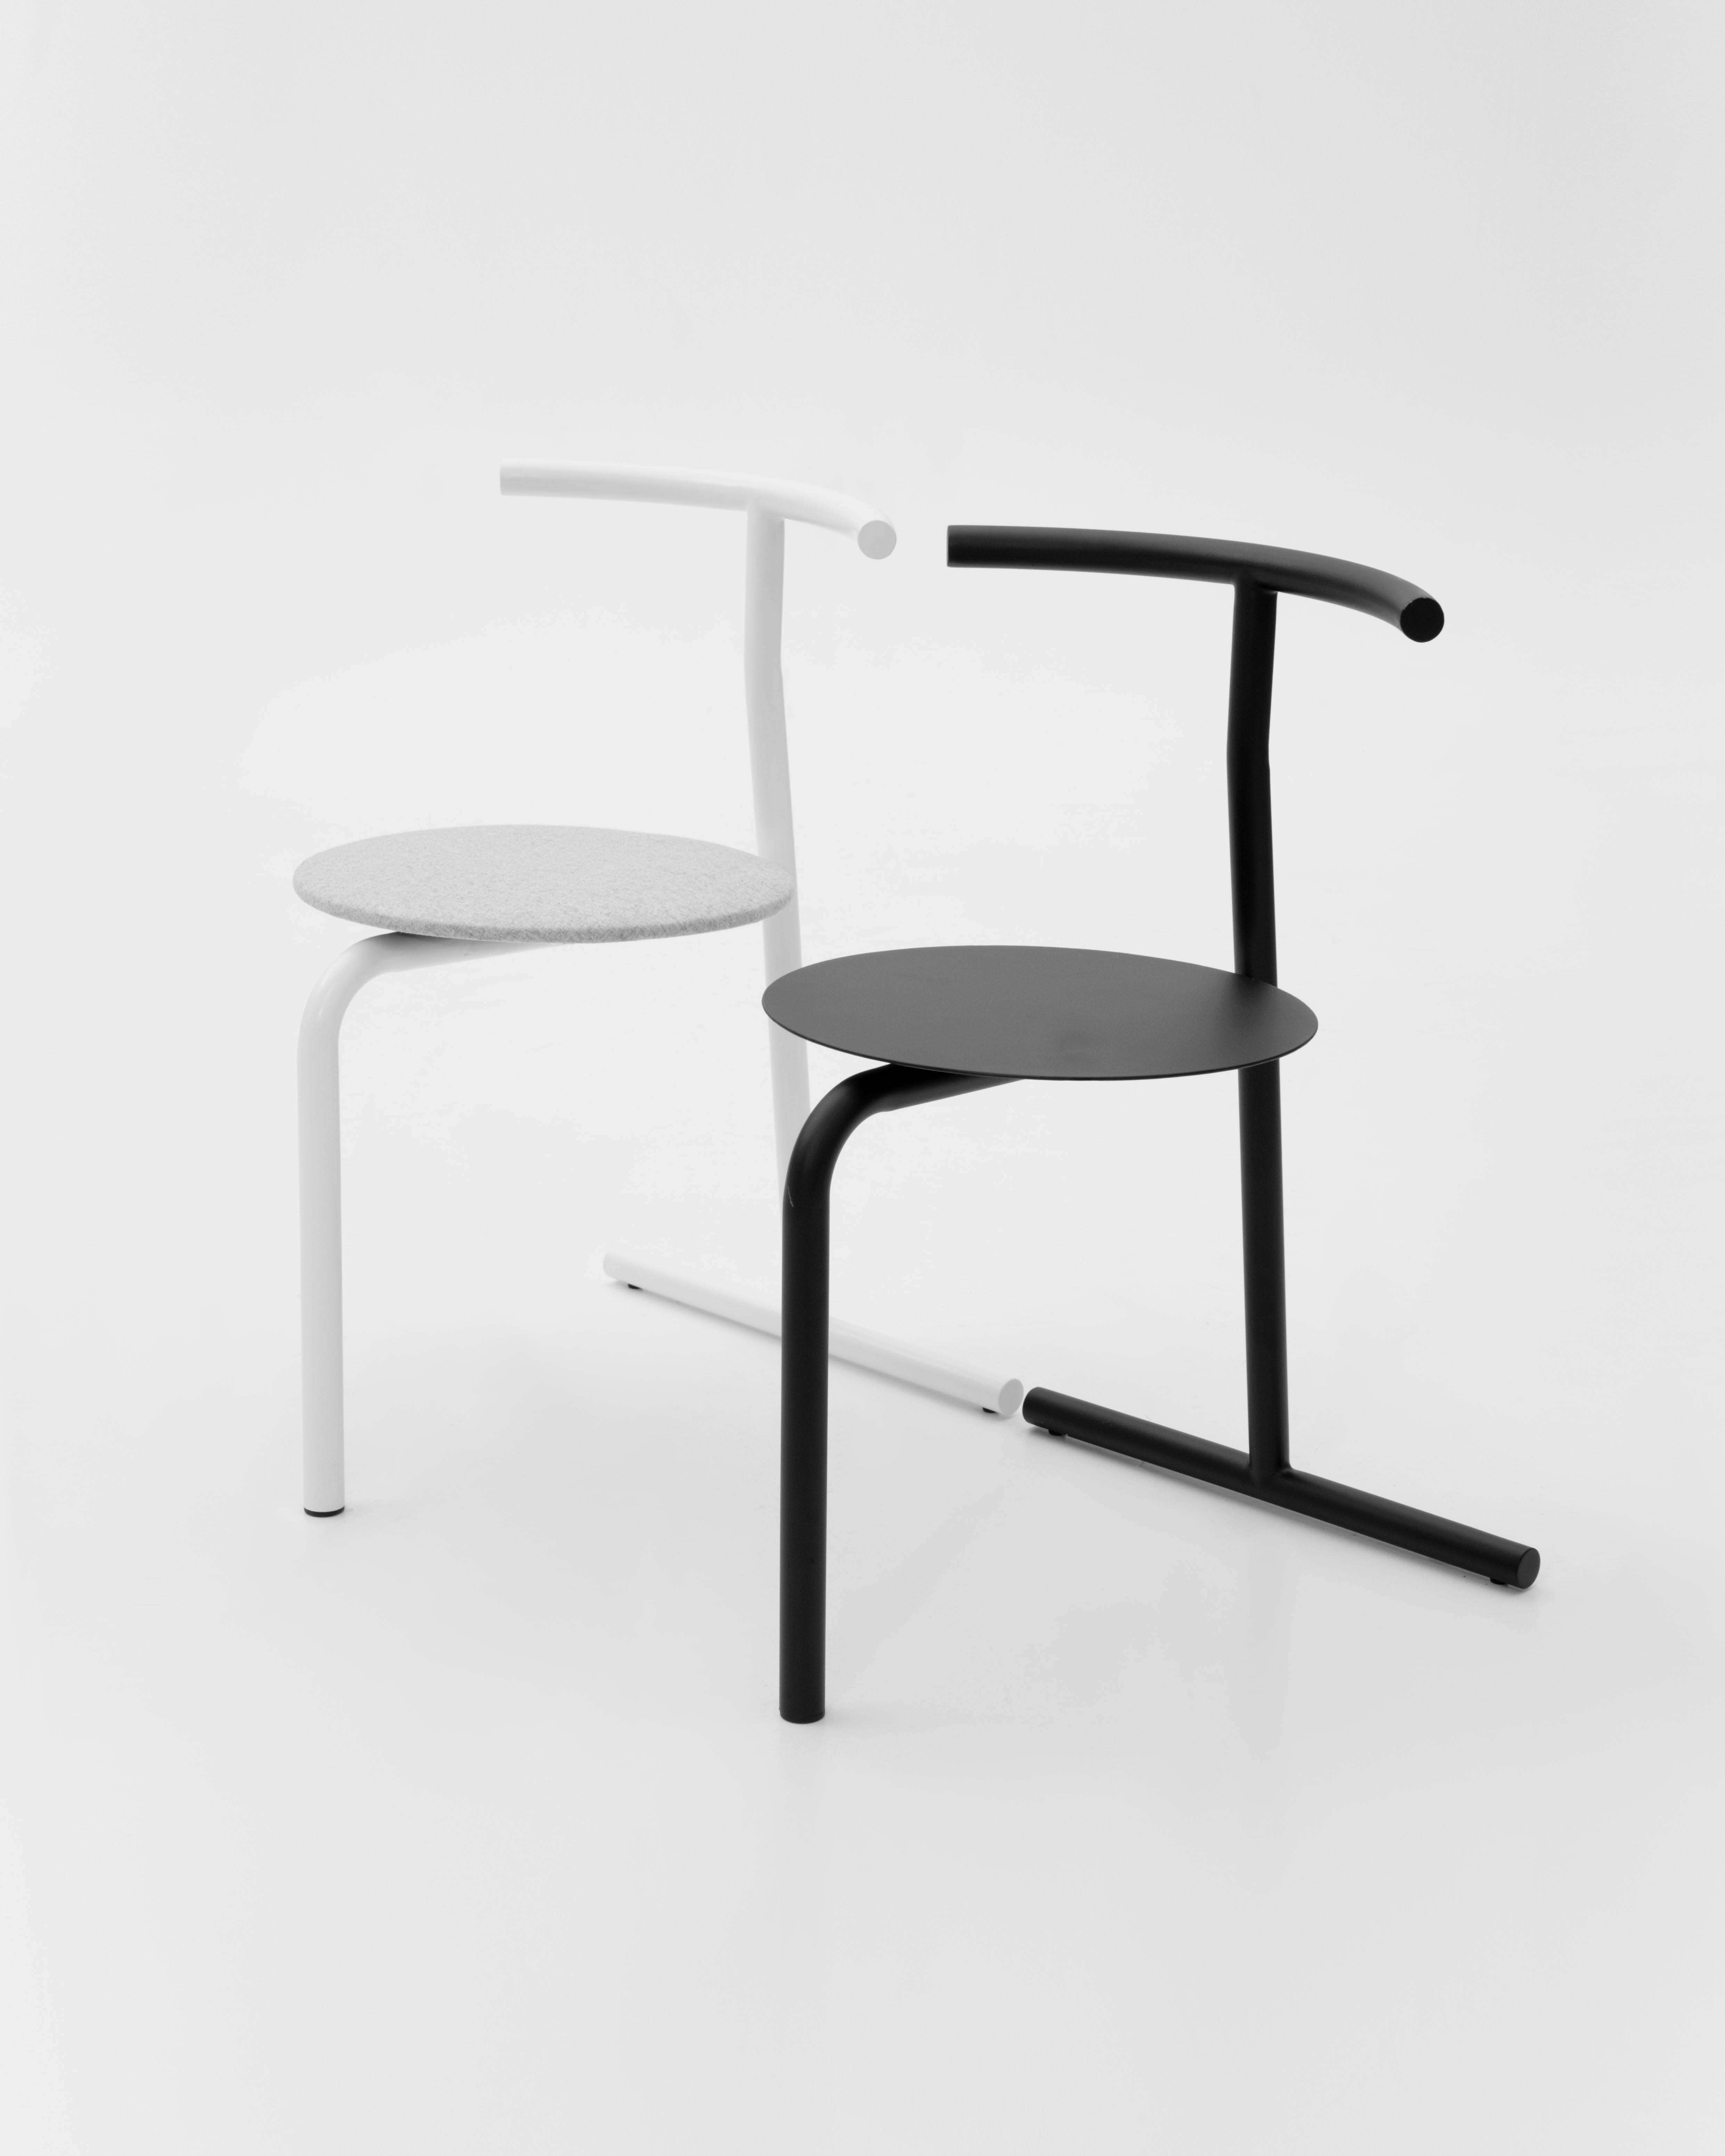 Set of 2 eater steel seats by Oito
Dimensions: D 50 x W 58 x H 78 cm each
Materials:Powder coated steel
Weight: 6 kg each
Also available in different base color: Black, white, blue
 
We've always wanted to create a chair with two legs. After